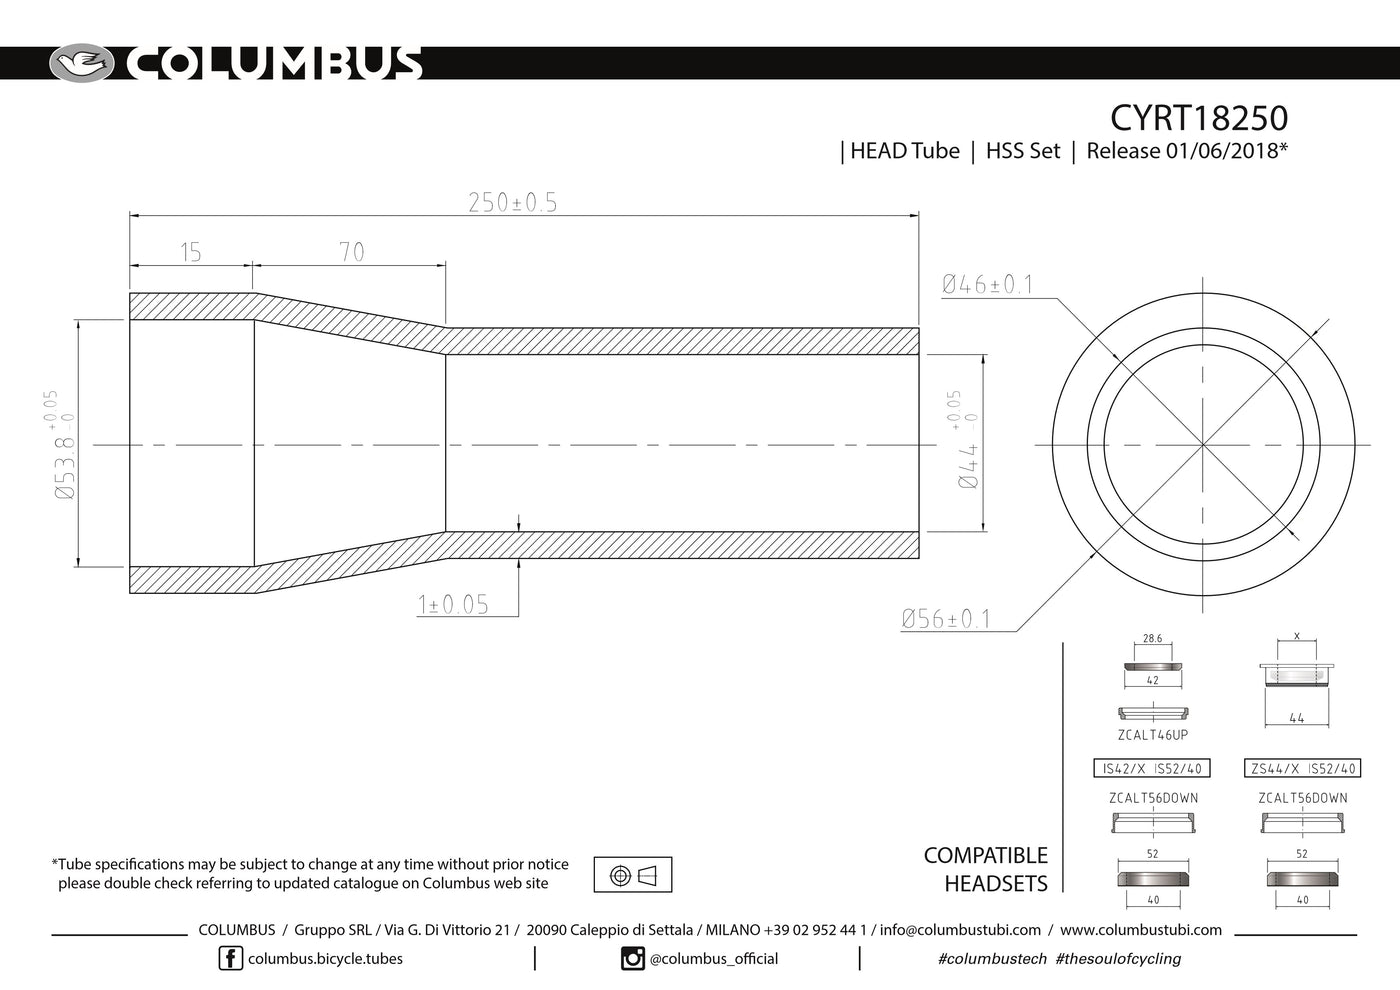 CYRT18250  Columbus Tubing HSS tapered headtube for 1-1/8" - 1.5" tapered forks. 56/46 dia. - 1mm wall - length = 250 